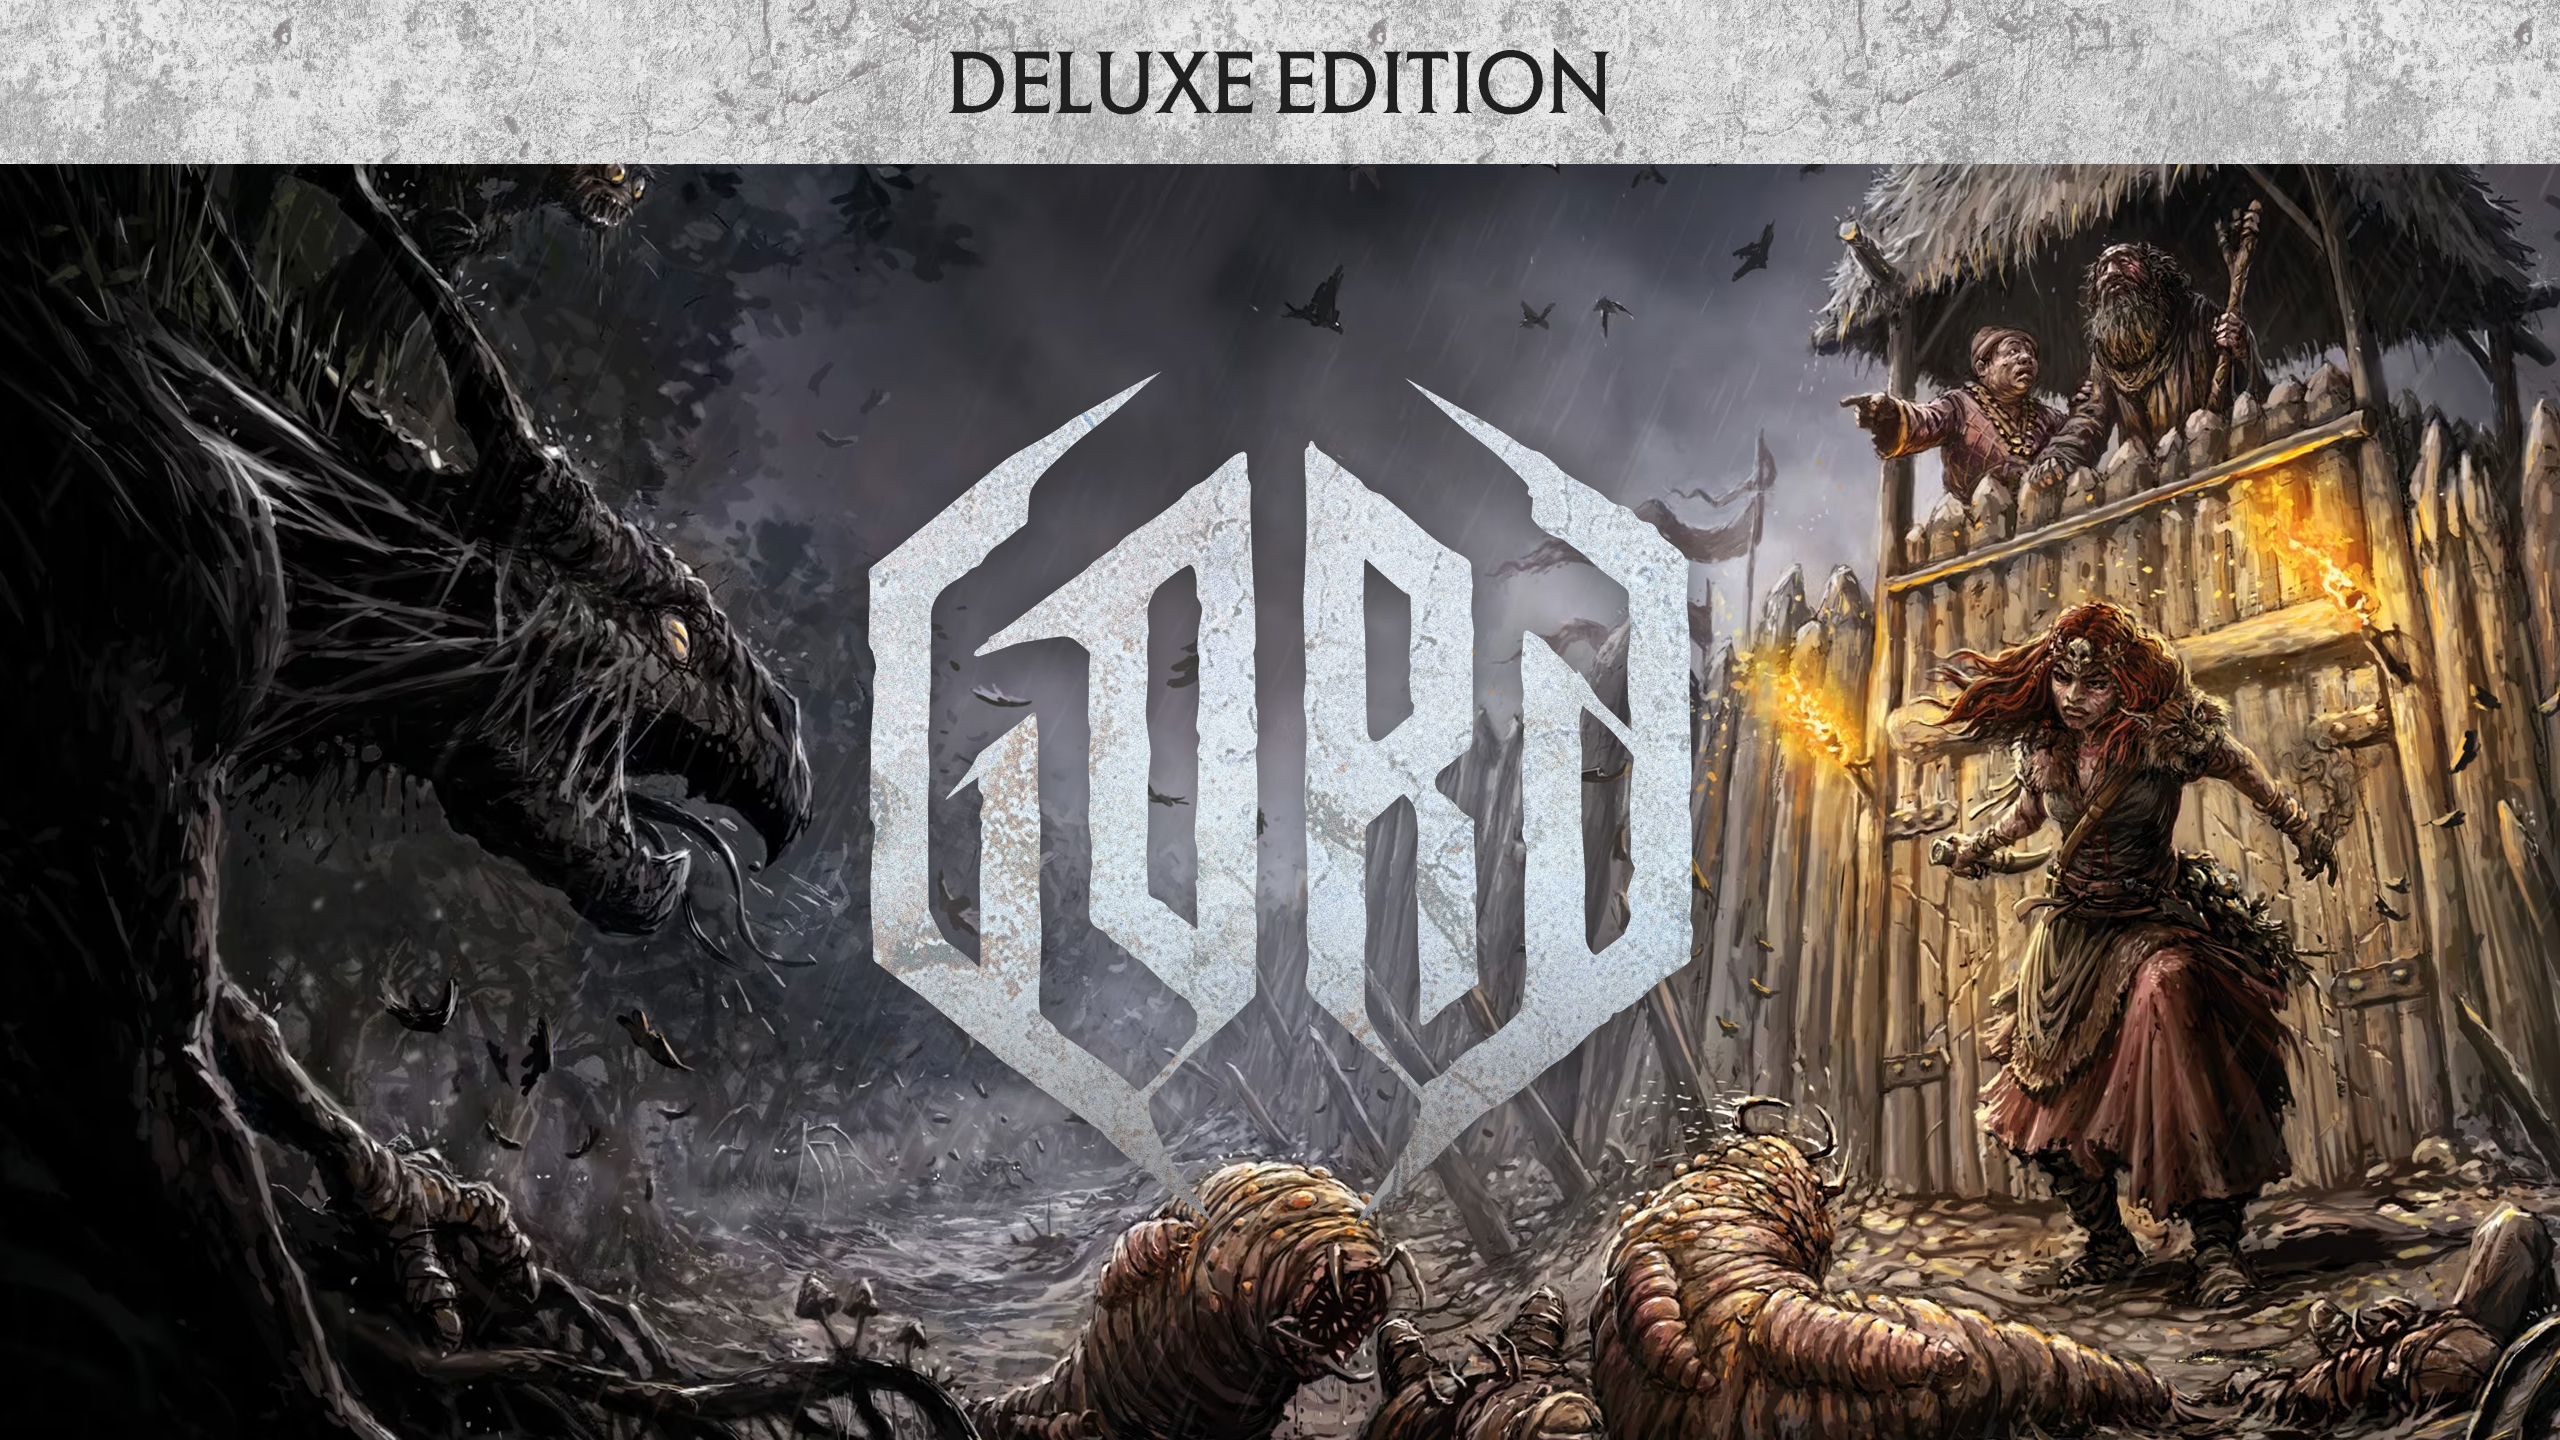 Gord - Deluxe Edition